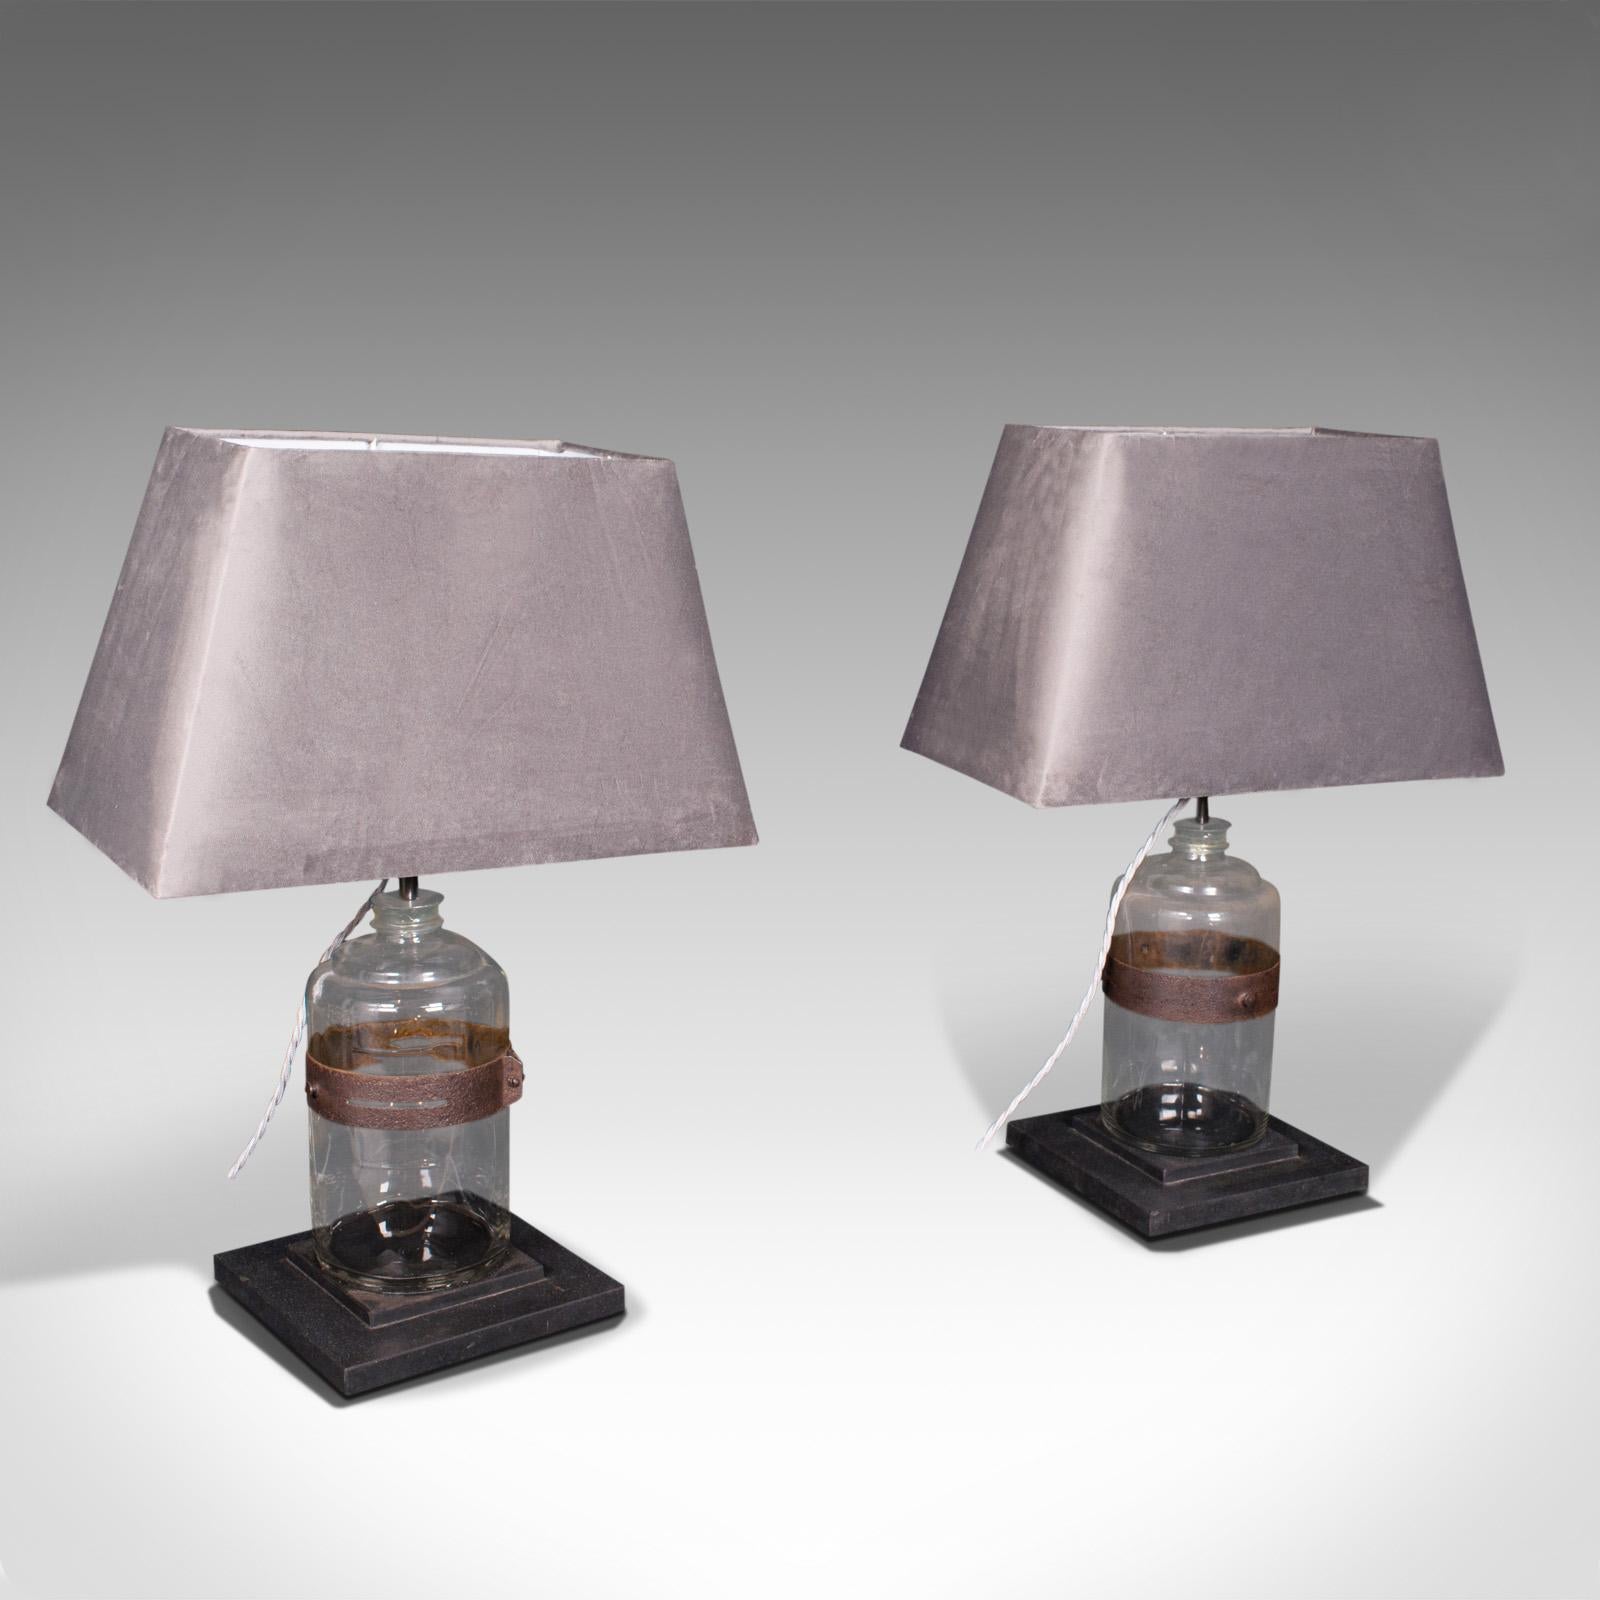 This is a pair of antique jar lamps. An English, paraffin glass jar with slate base side light, dating to the Victorian period and later, circa 1900.

Lovingly converted Victorian paraffin jars with an inviting, warm glow
Displaying a desirable